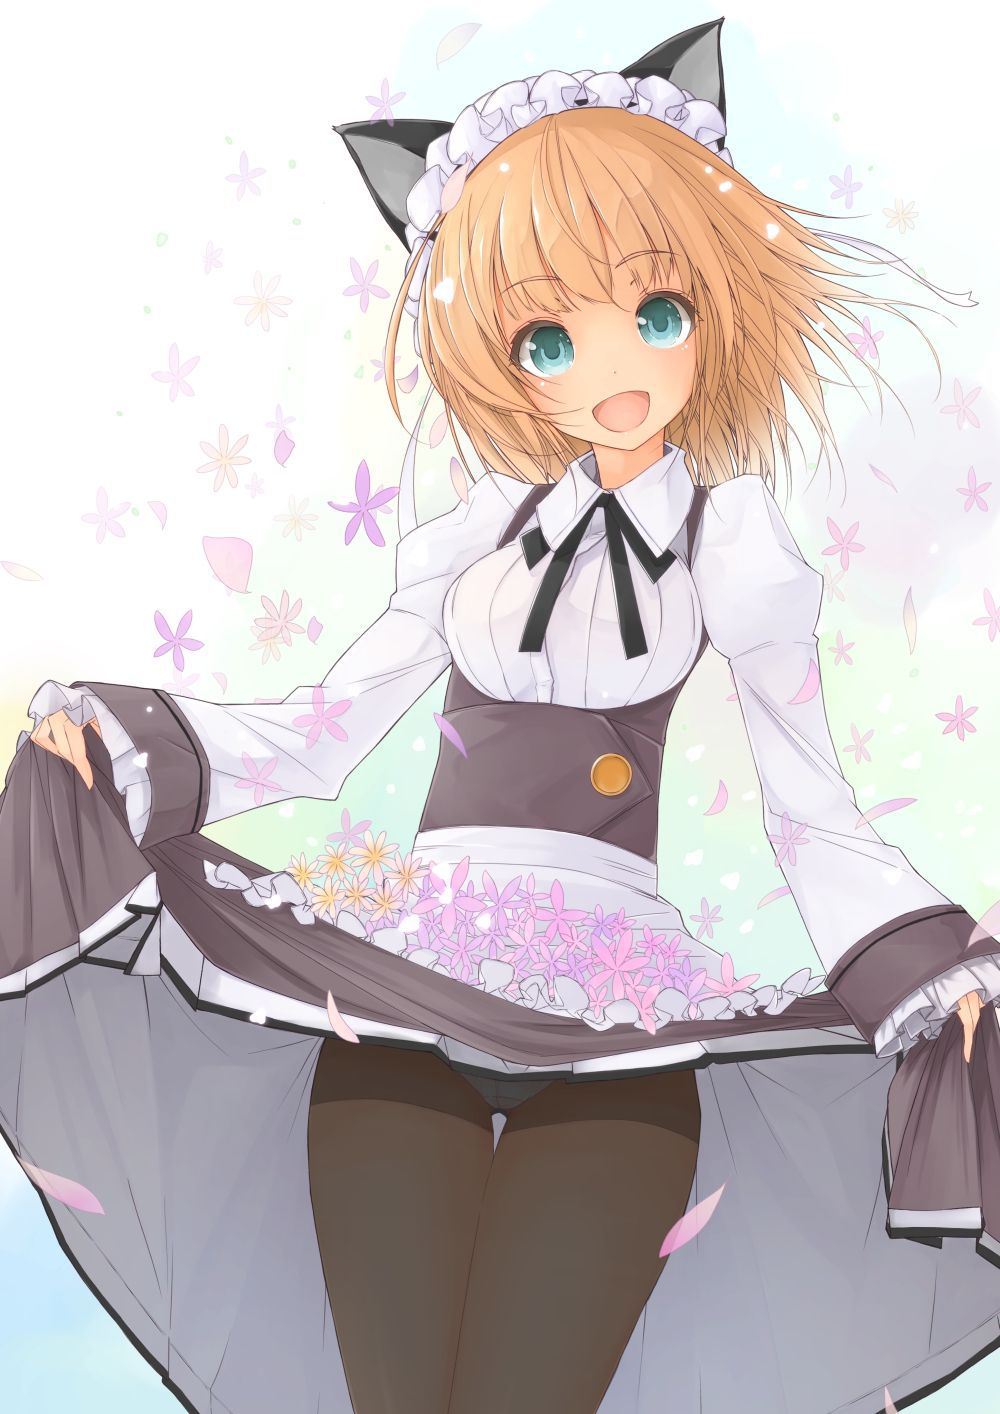 Take a picture of the lovely maid, (secondary / ZIP) instinctively want to hit will be 11